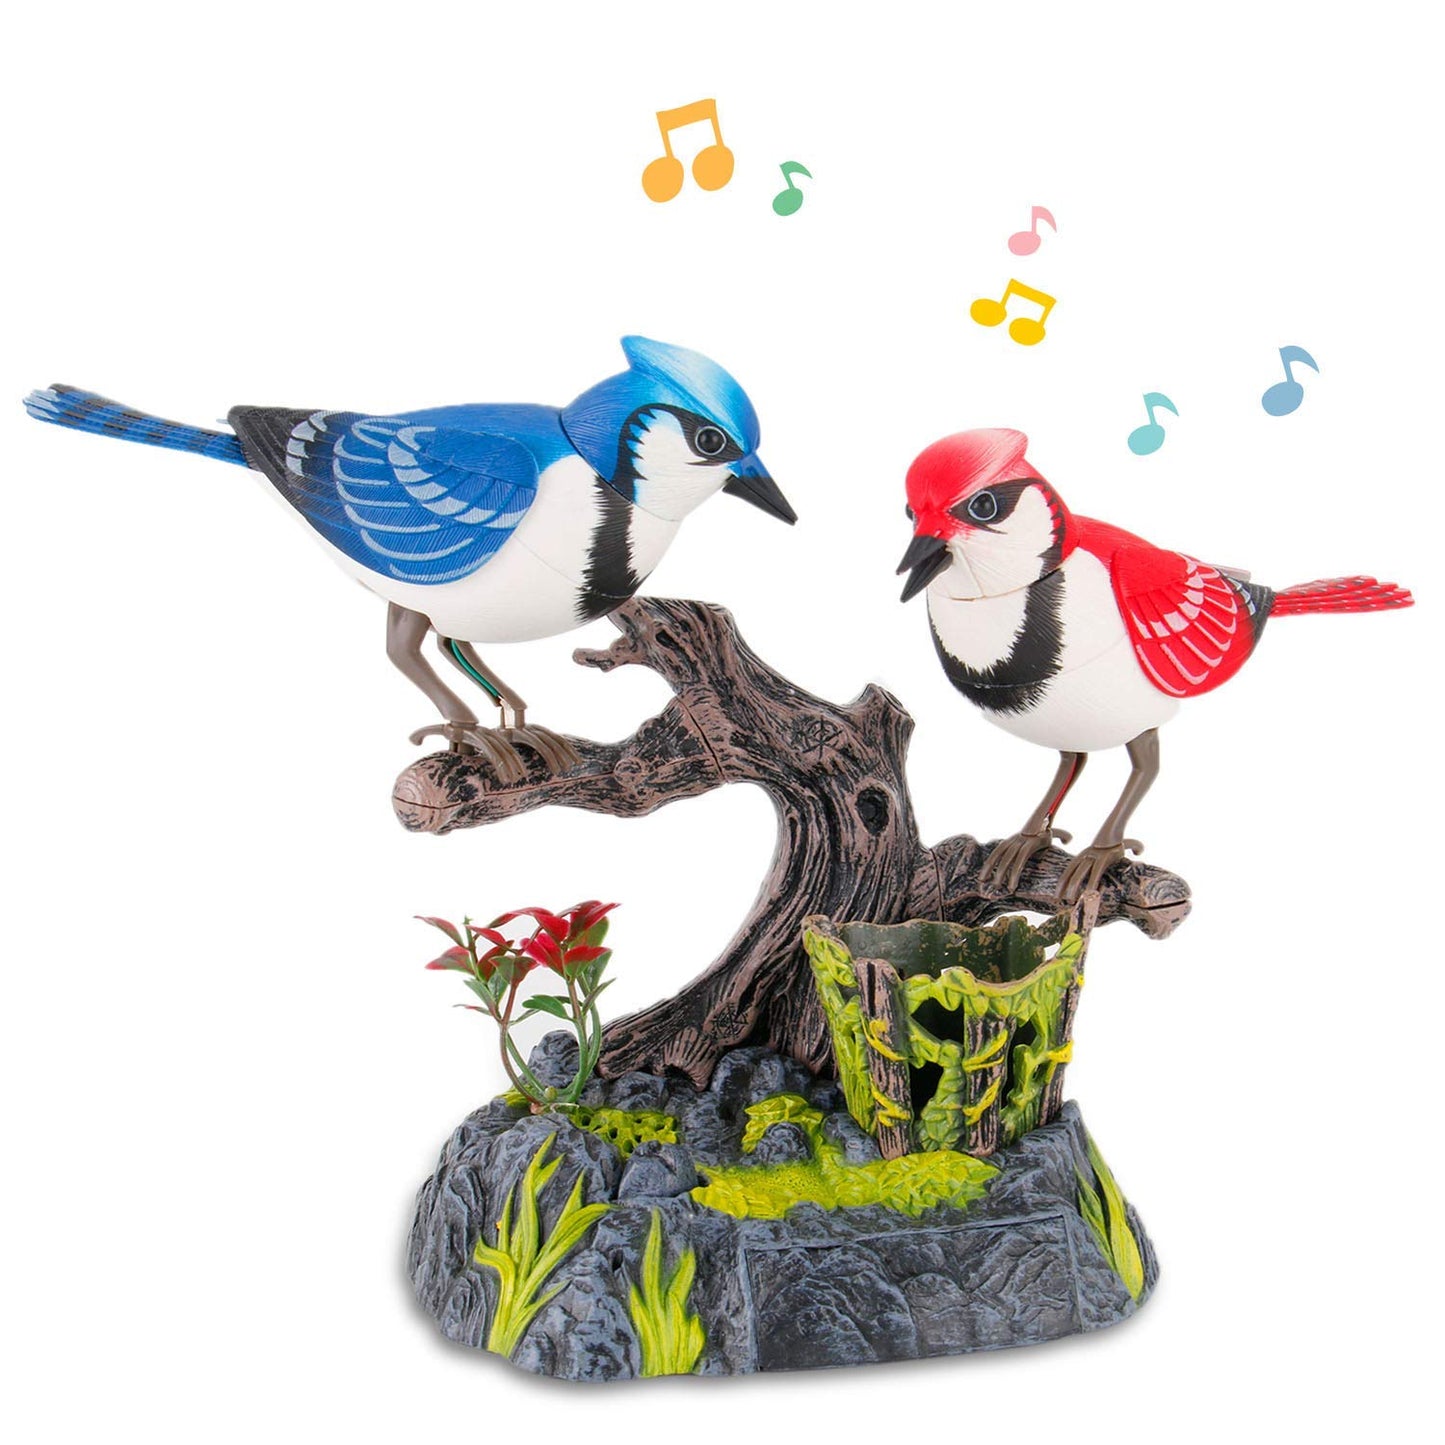 Singing & Chirping Birds - Realistic Sounds and Movements (Blue Jays)